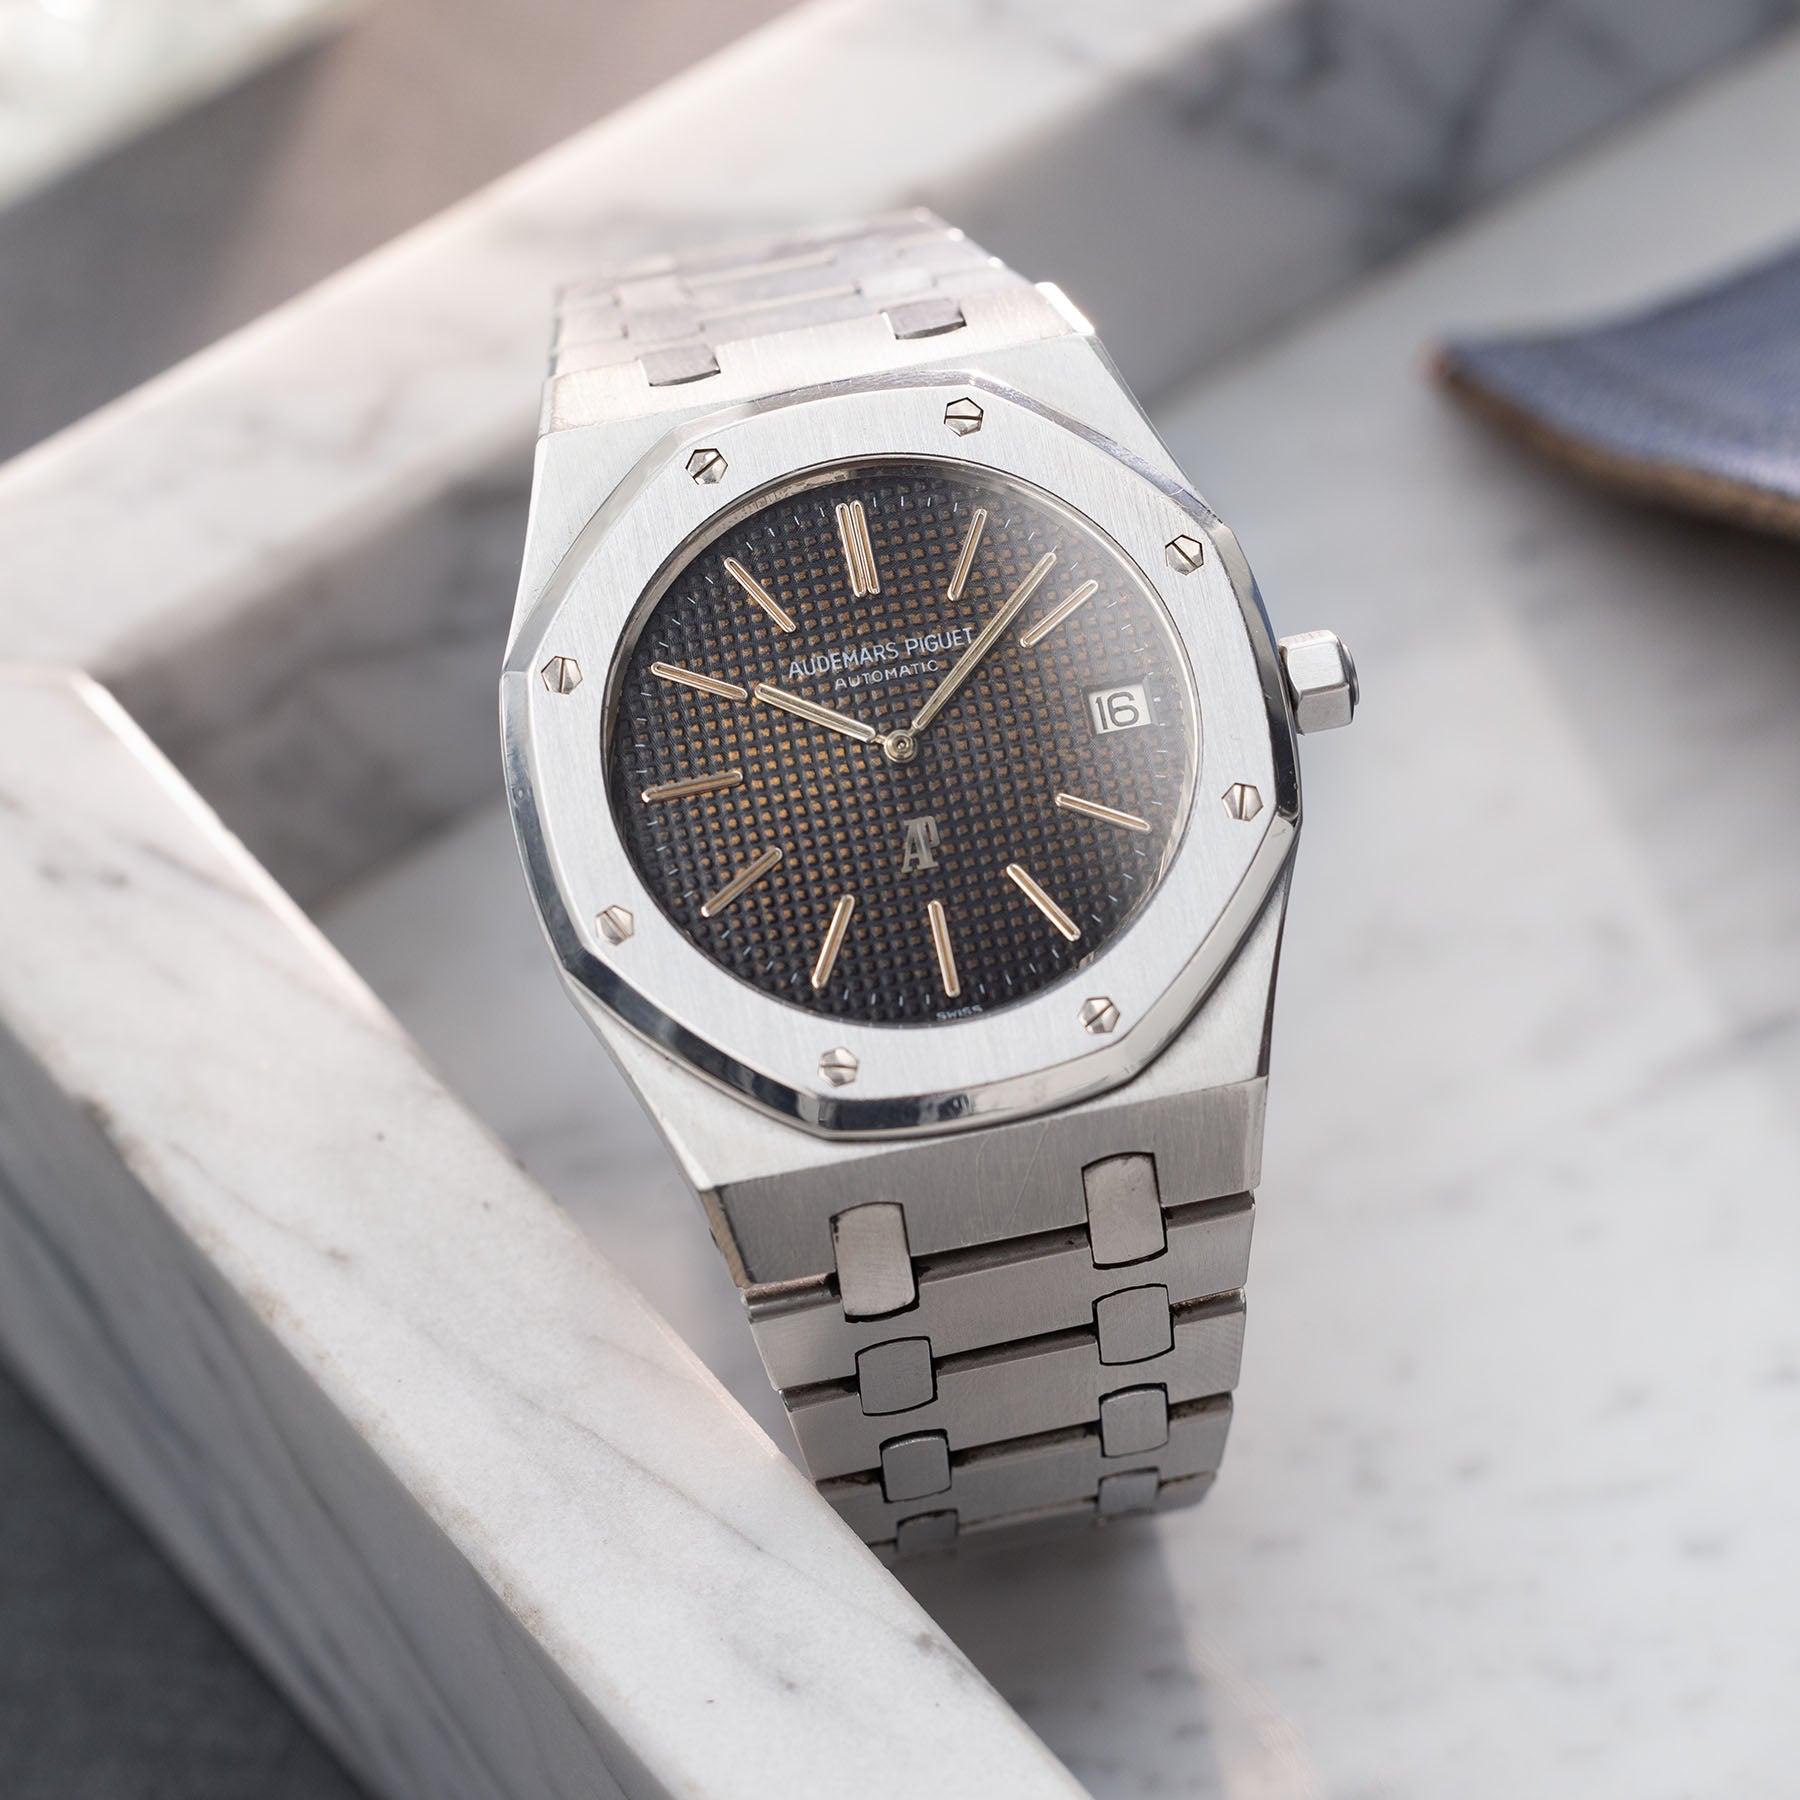 Royal Oak Roots: How To Tell If Your Audemars Piguet Watch Is Real